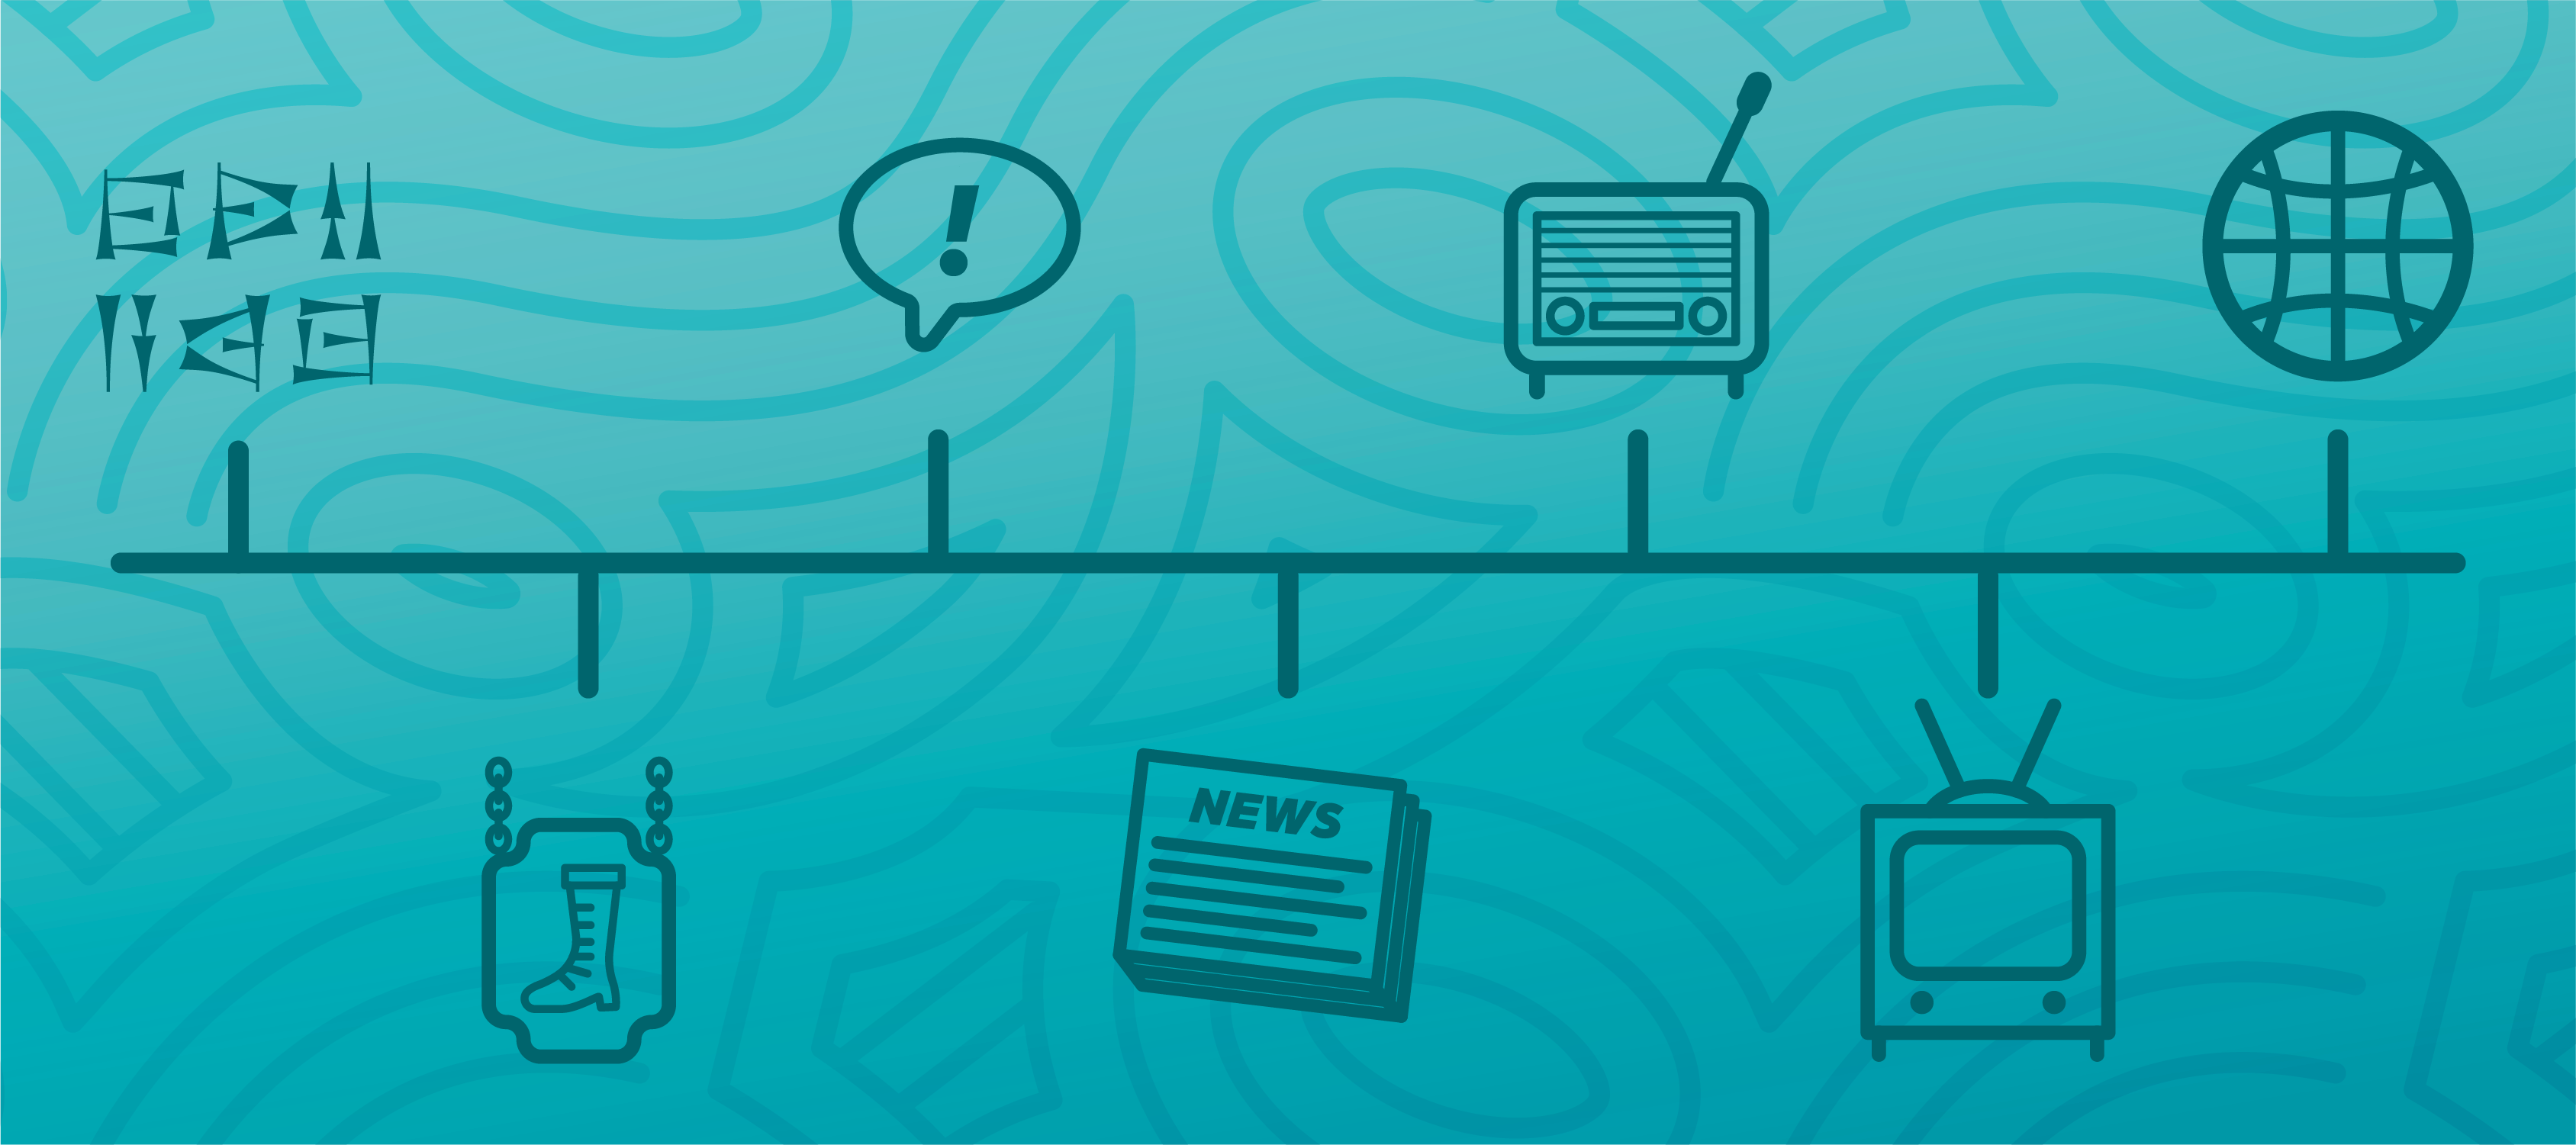 A timeline showing the history of marketing through icons: Cuneiform, signs with pictures, a shouting speech bubble, a newspaper, a radio, an old TV, and the symbol for the internet